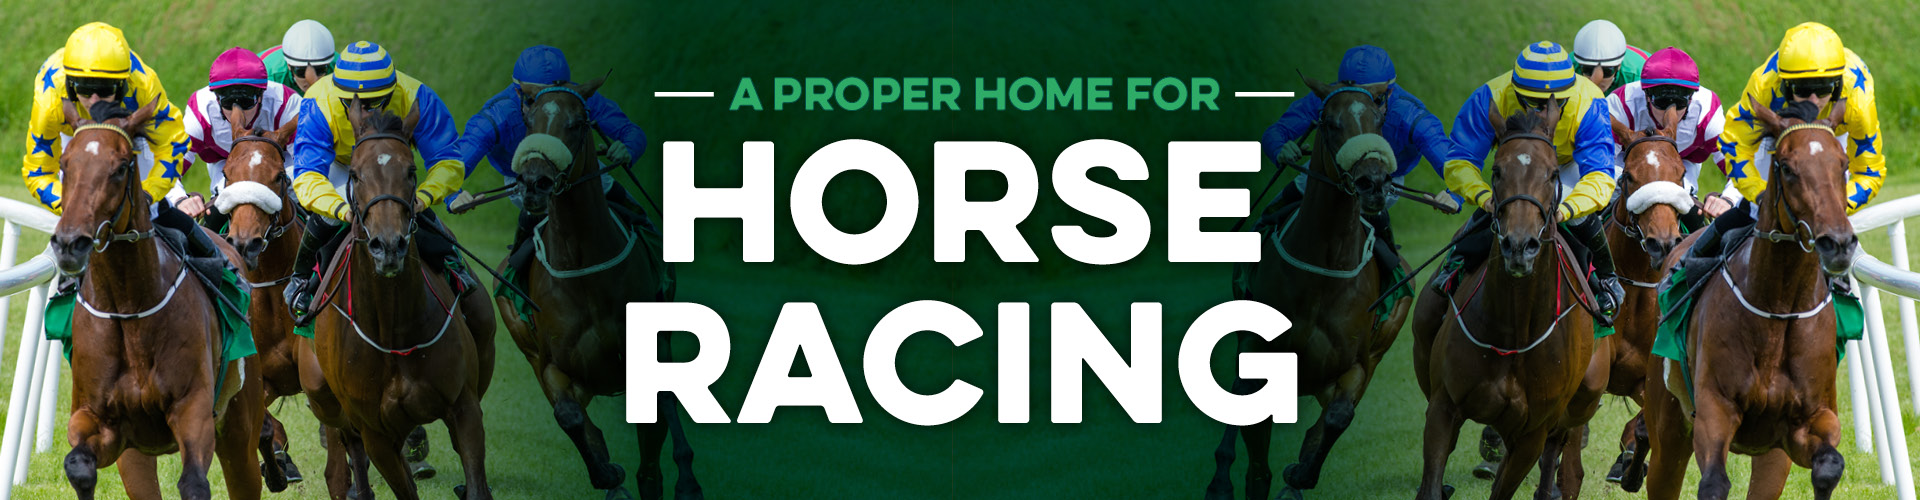 Watch horse racing live at The Black Hat pub